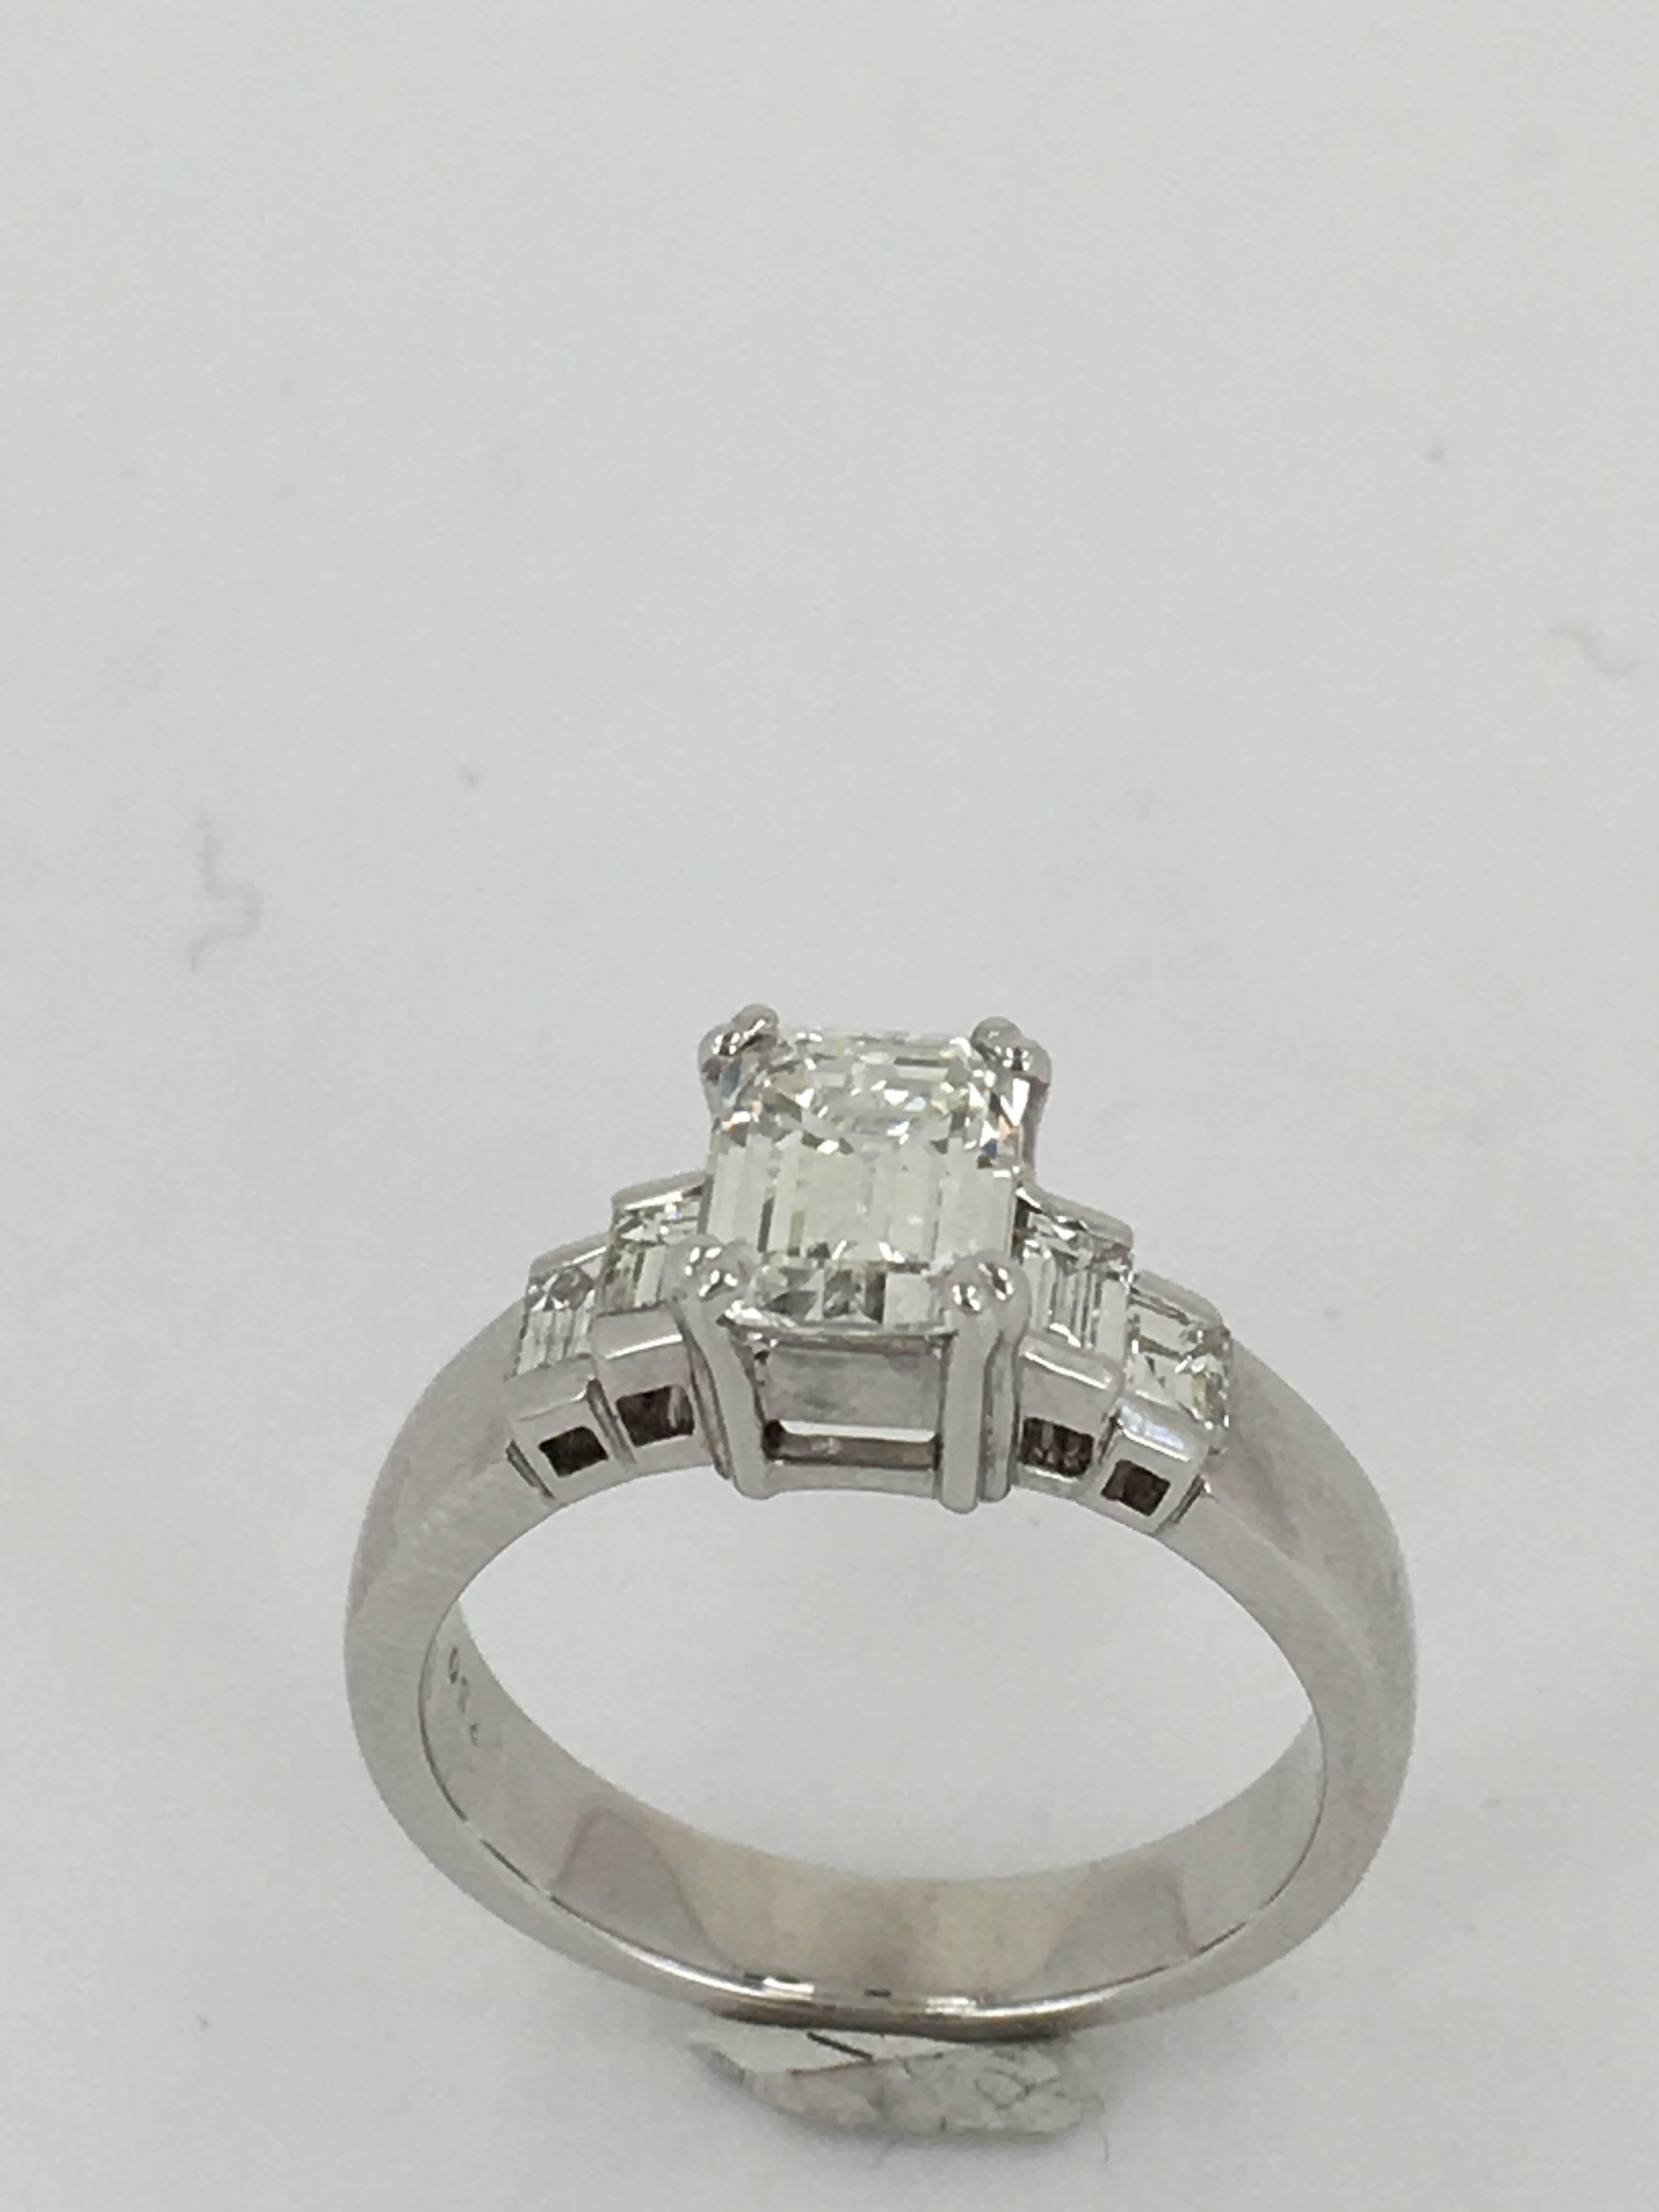 Emerald Cut Diamond Solitare Center Stone 1.21CTS Colour H VS2
Flanked with four bagettes total weight in excess of .50ct. Set on 18ct white Gold.

Size UK (M)    SIZE US (6)

Ring size can be adjusted at no cost